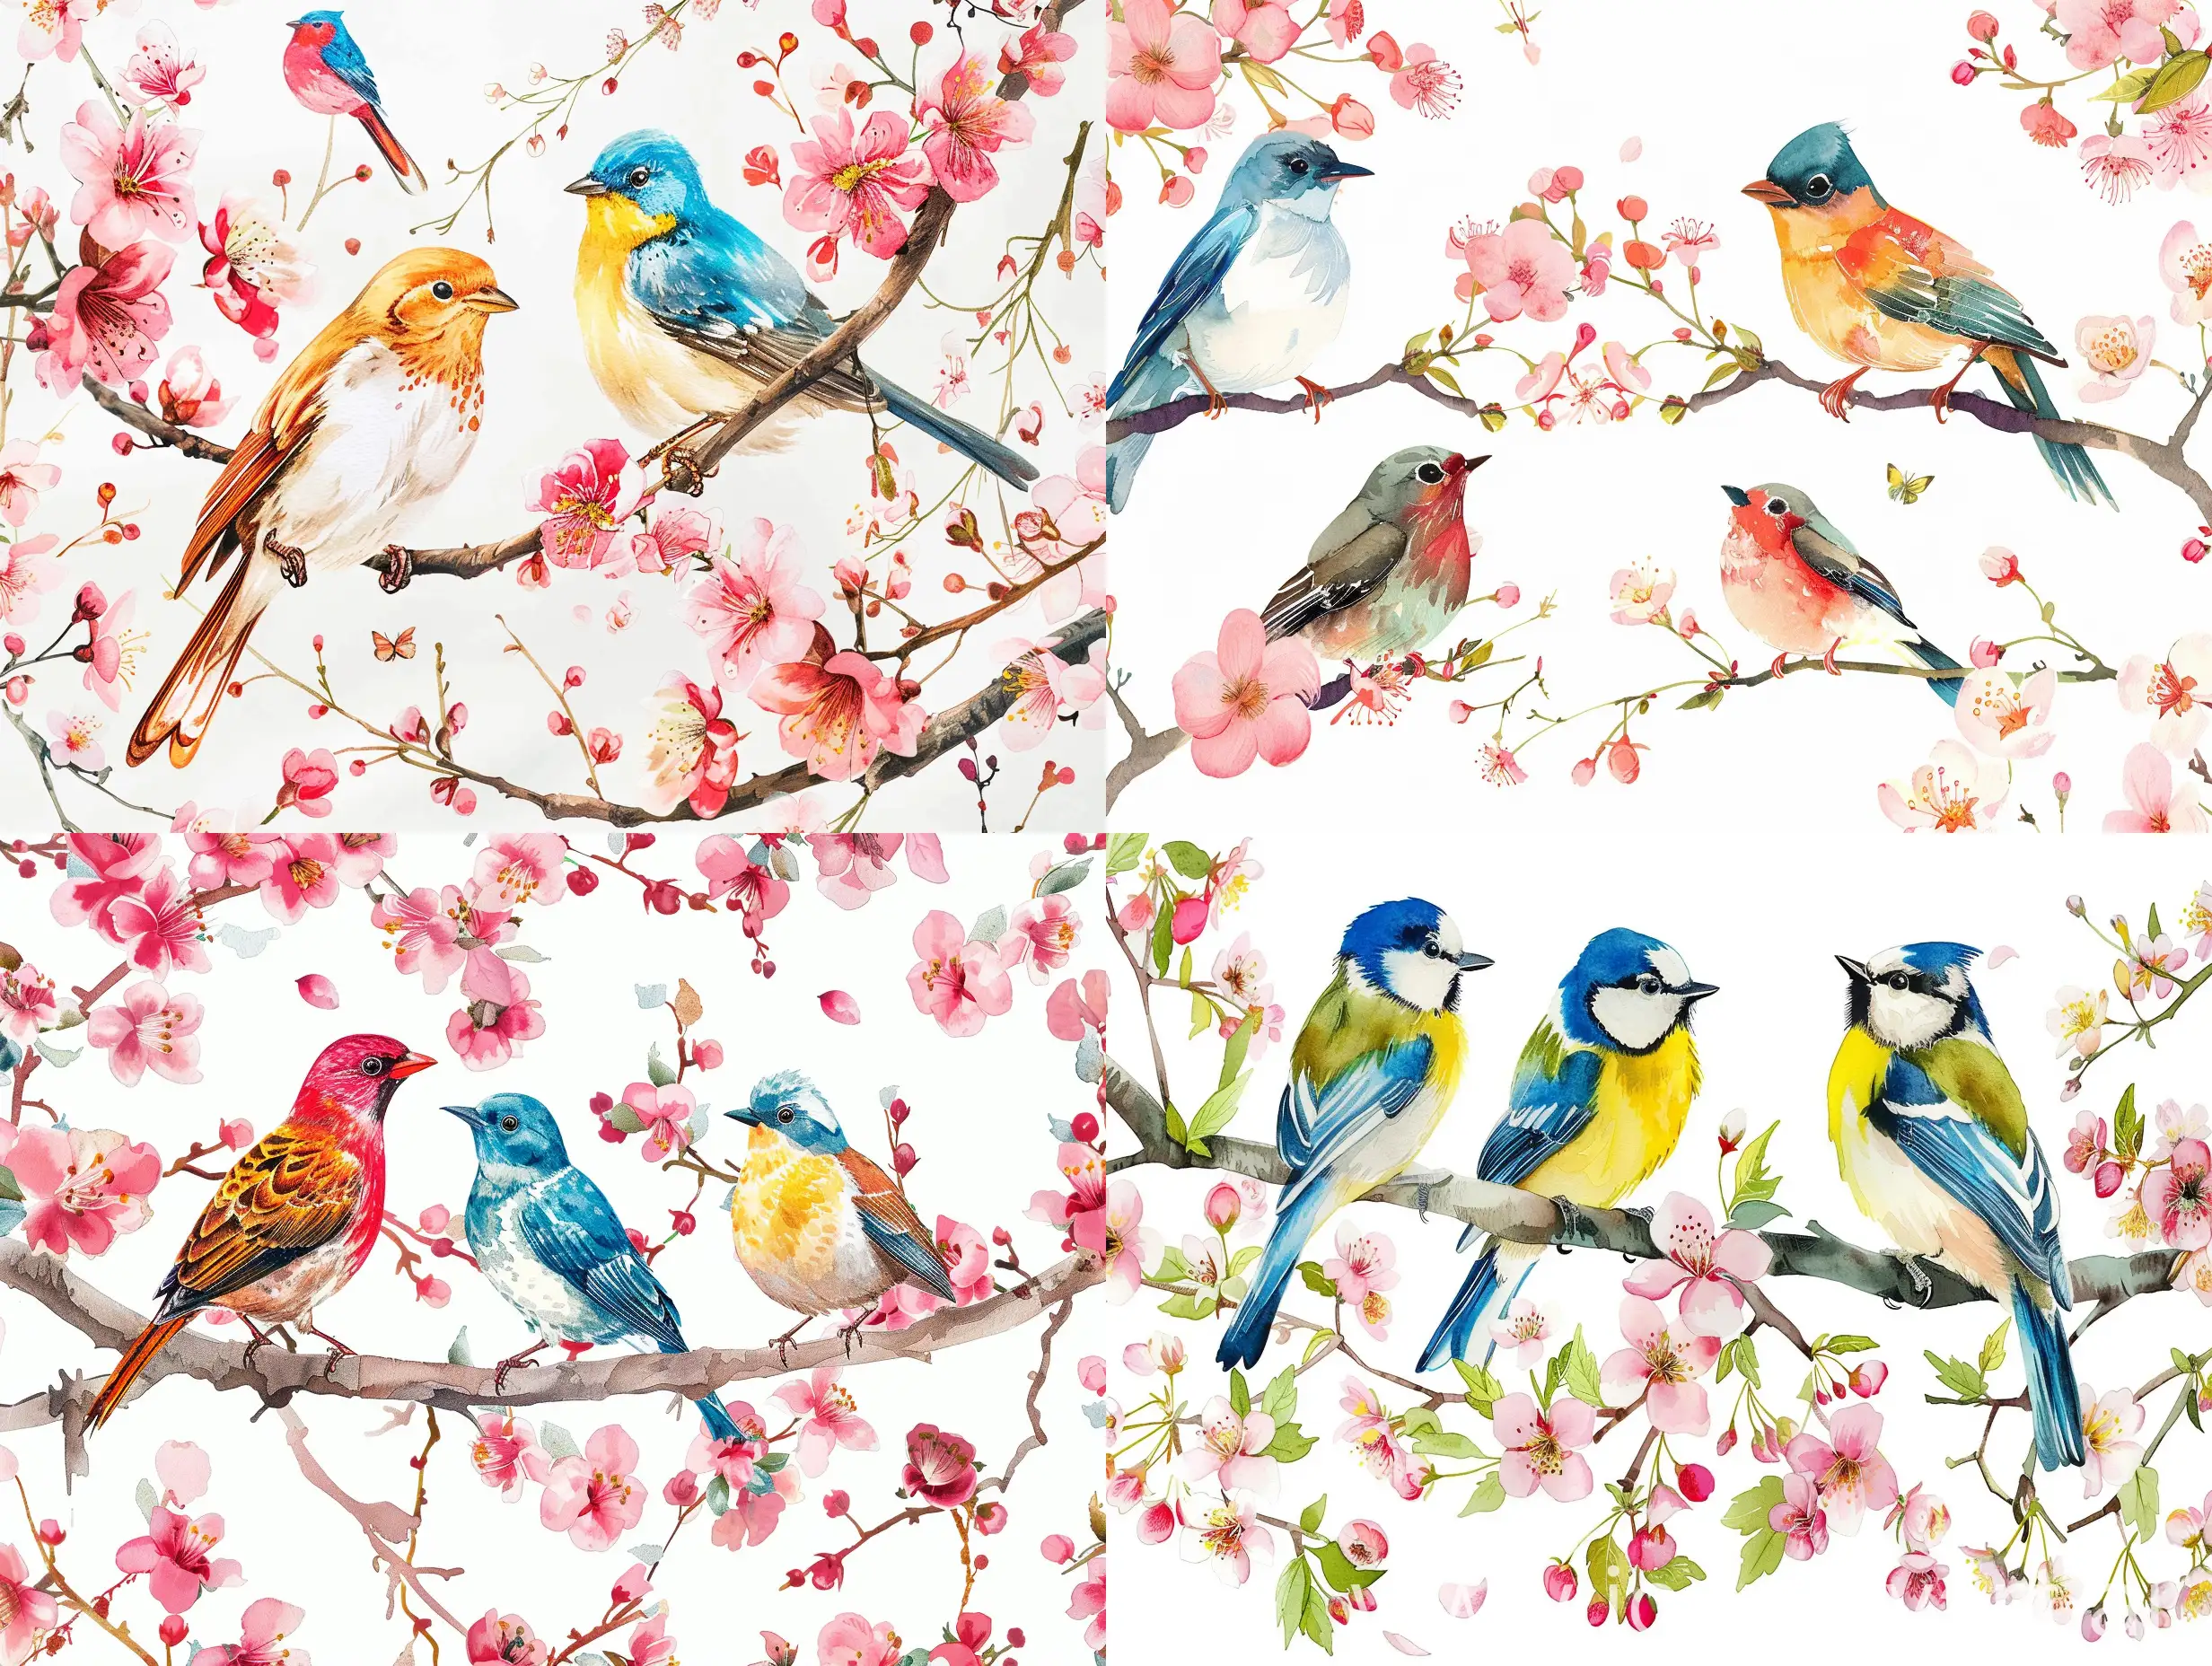 Vibrant-Birds-Amid-Blossoms-on-White-Background